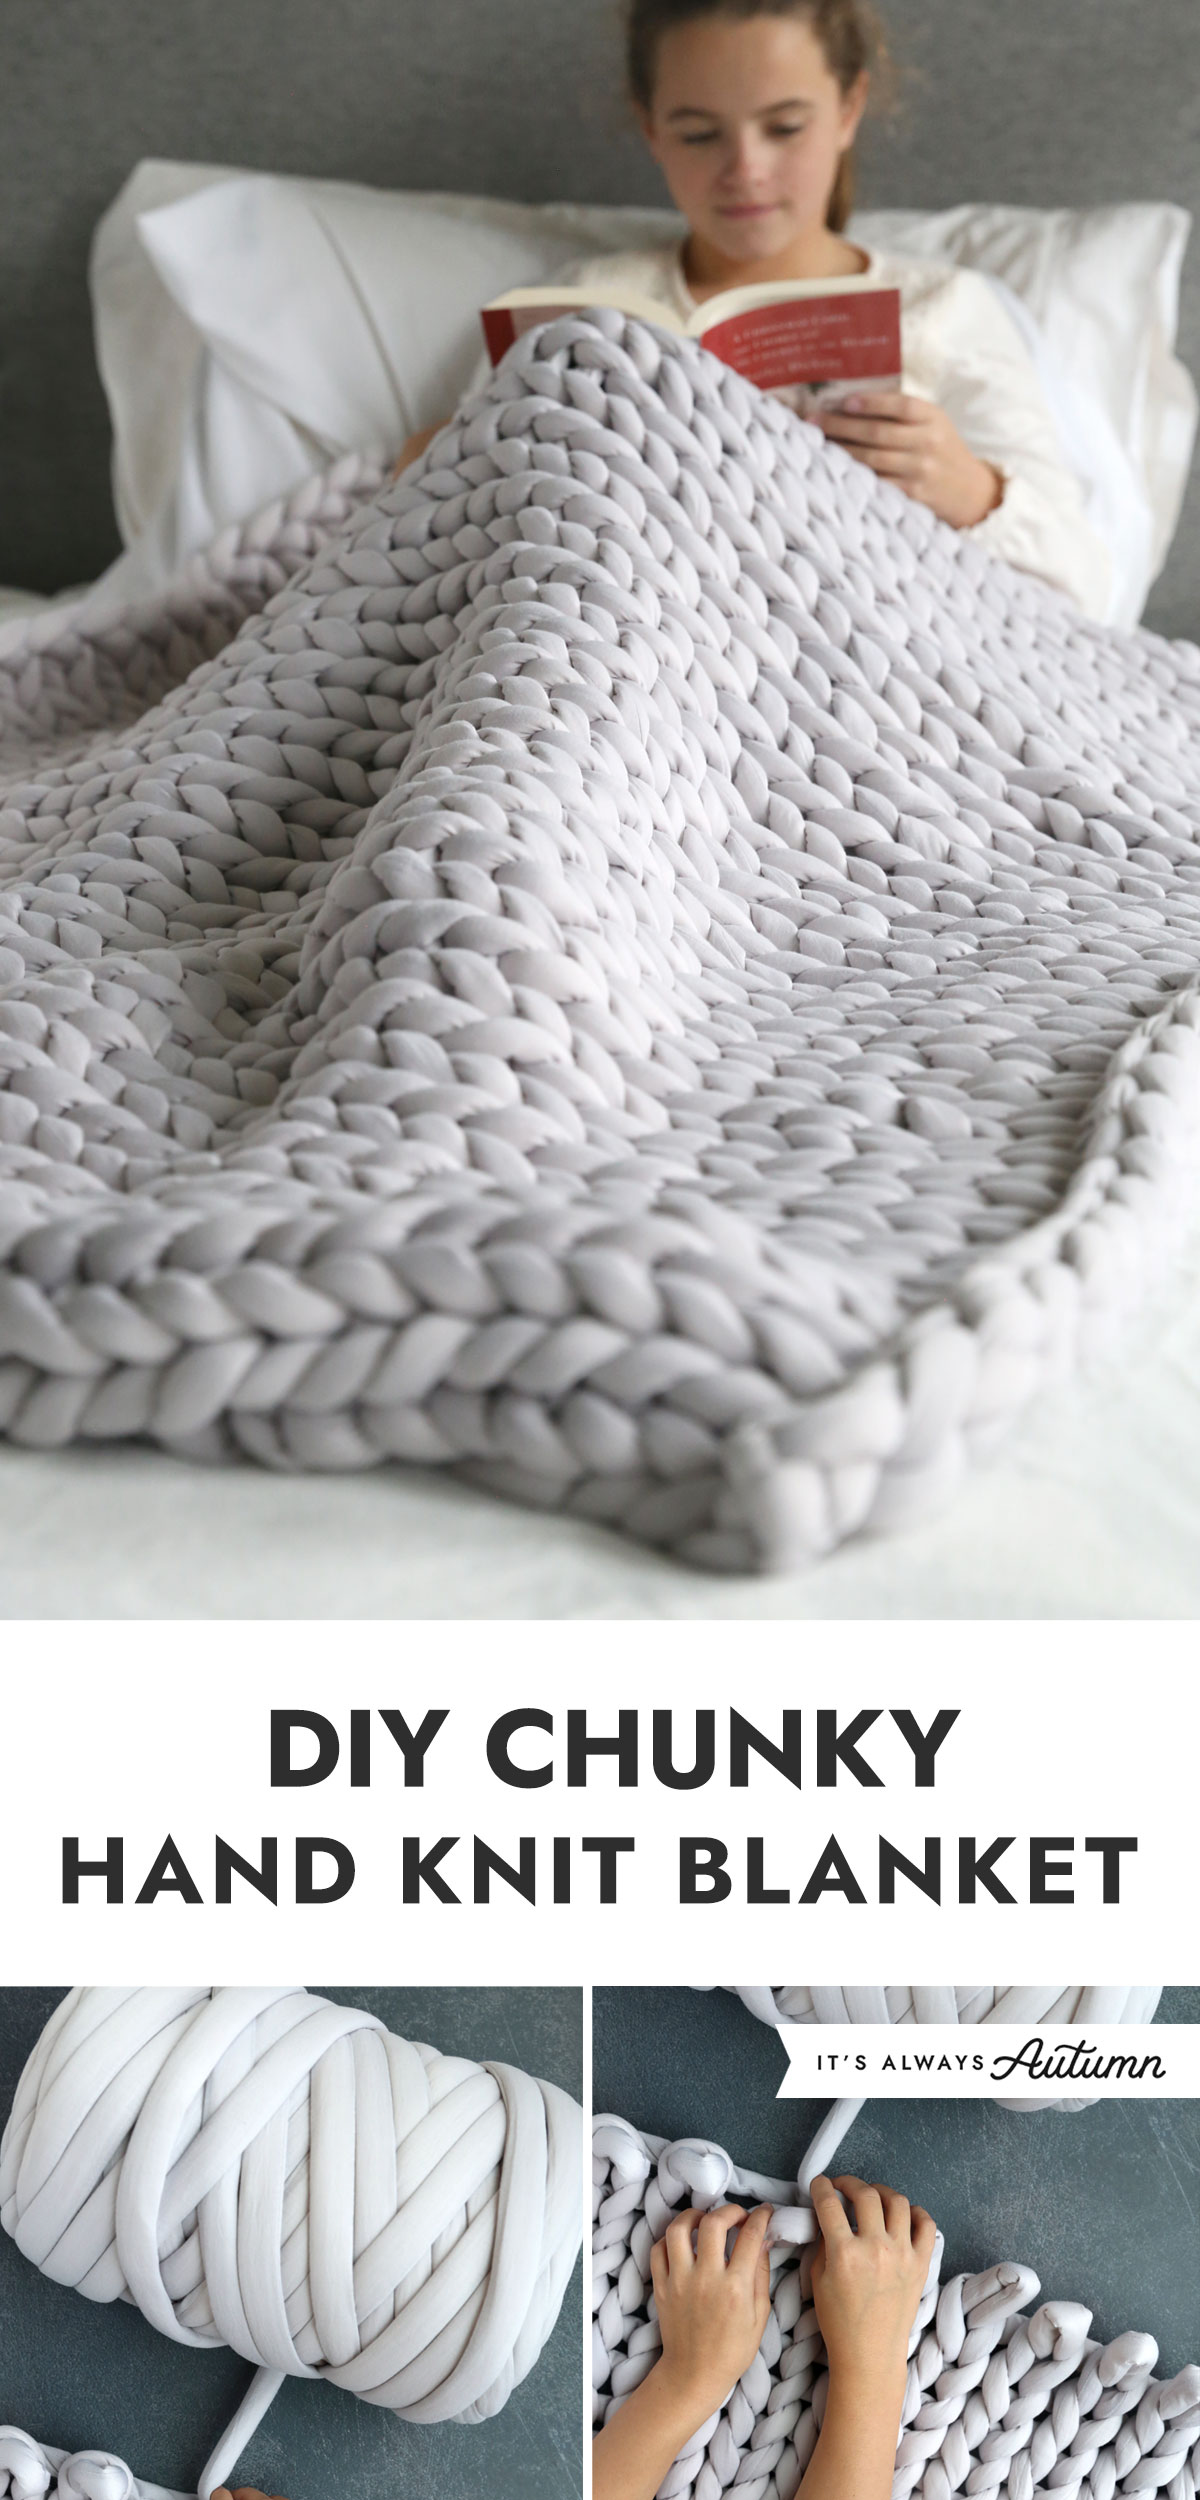 Hand knit a chunky chenille blanket, Medium size 40x60 inches